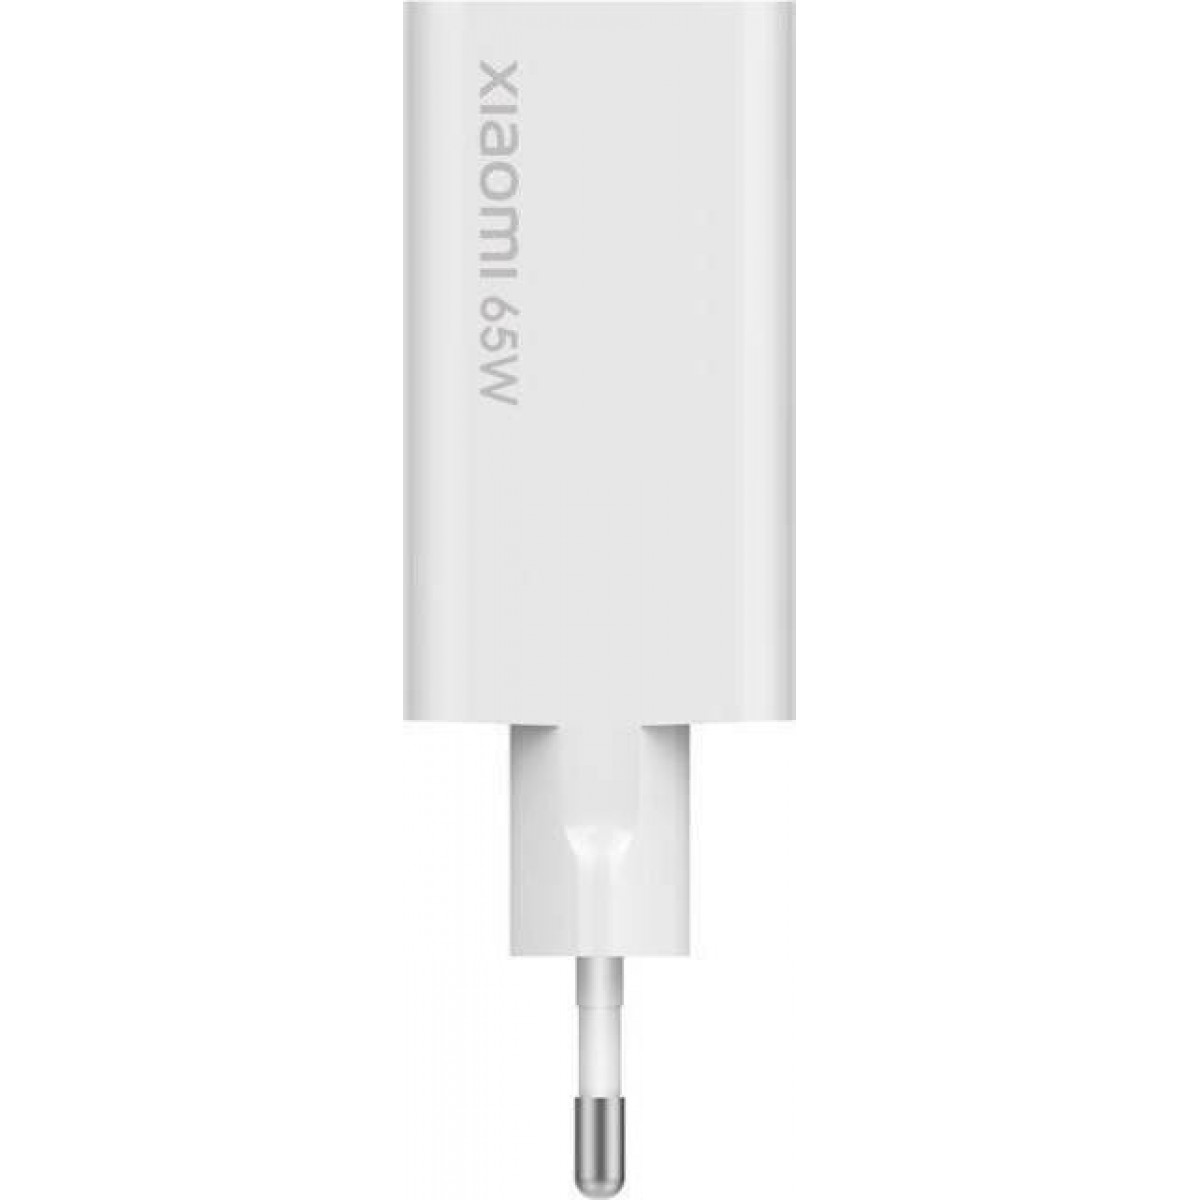 CHARGER XIAOMI 65W WITH GAN TECH WHITE BHR4499GL